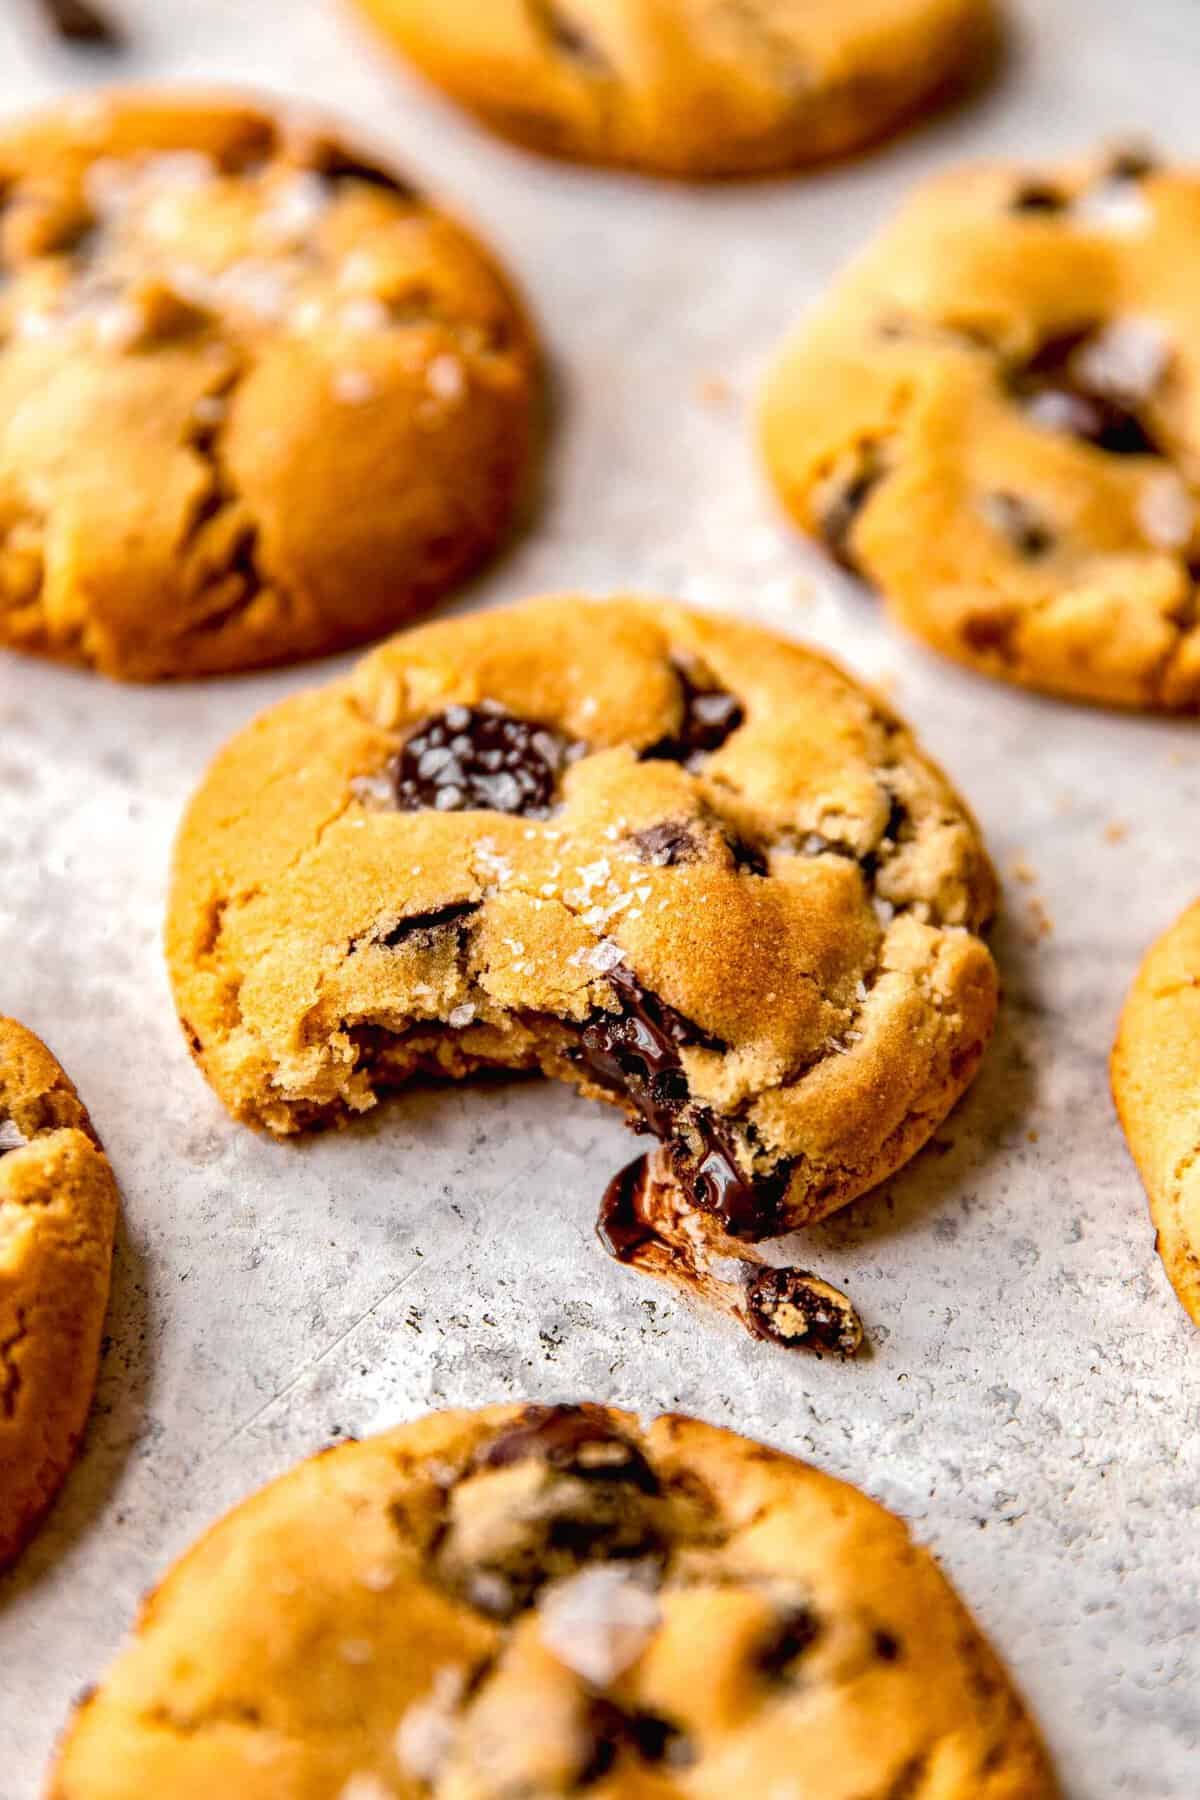 Chocolate chip cookies on a baking sheet. One has a bite taken out of it.